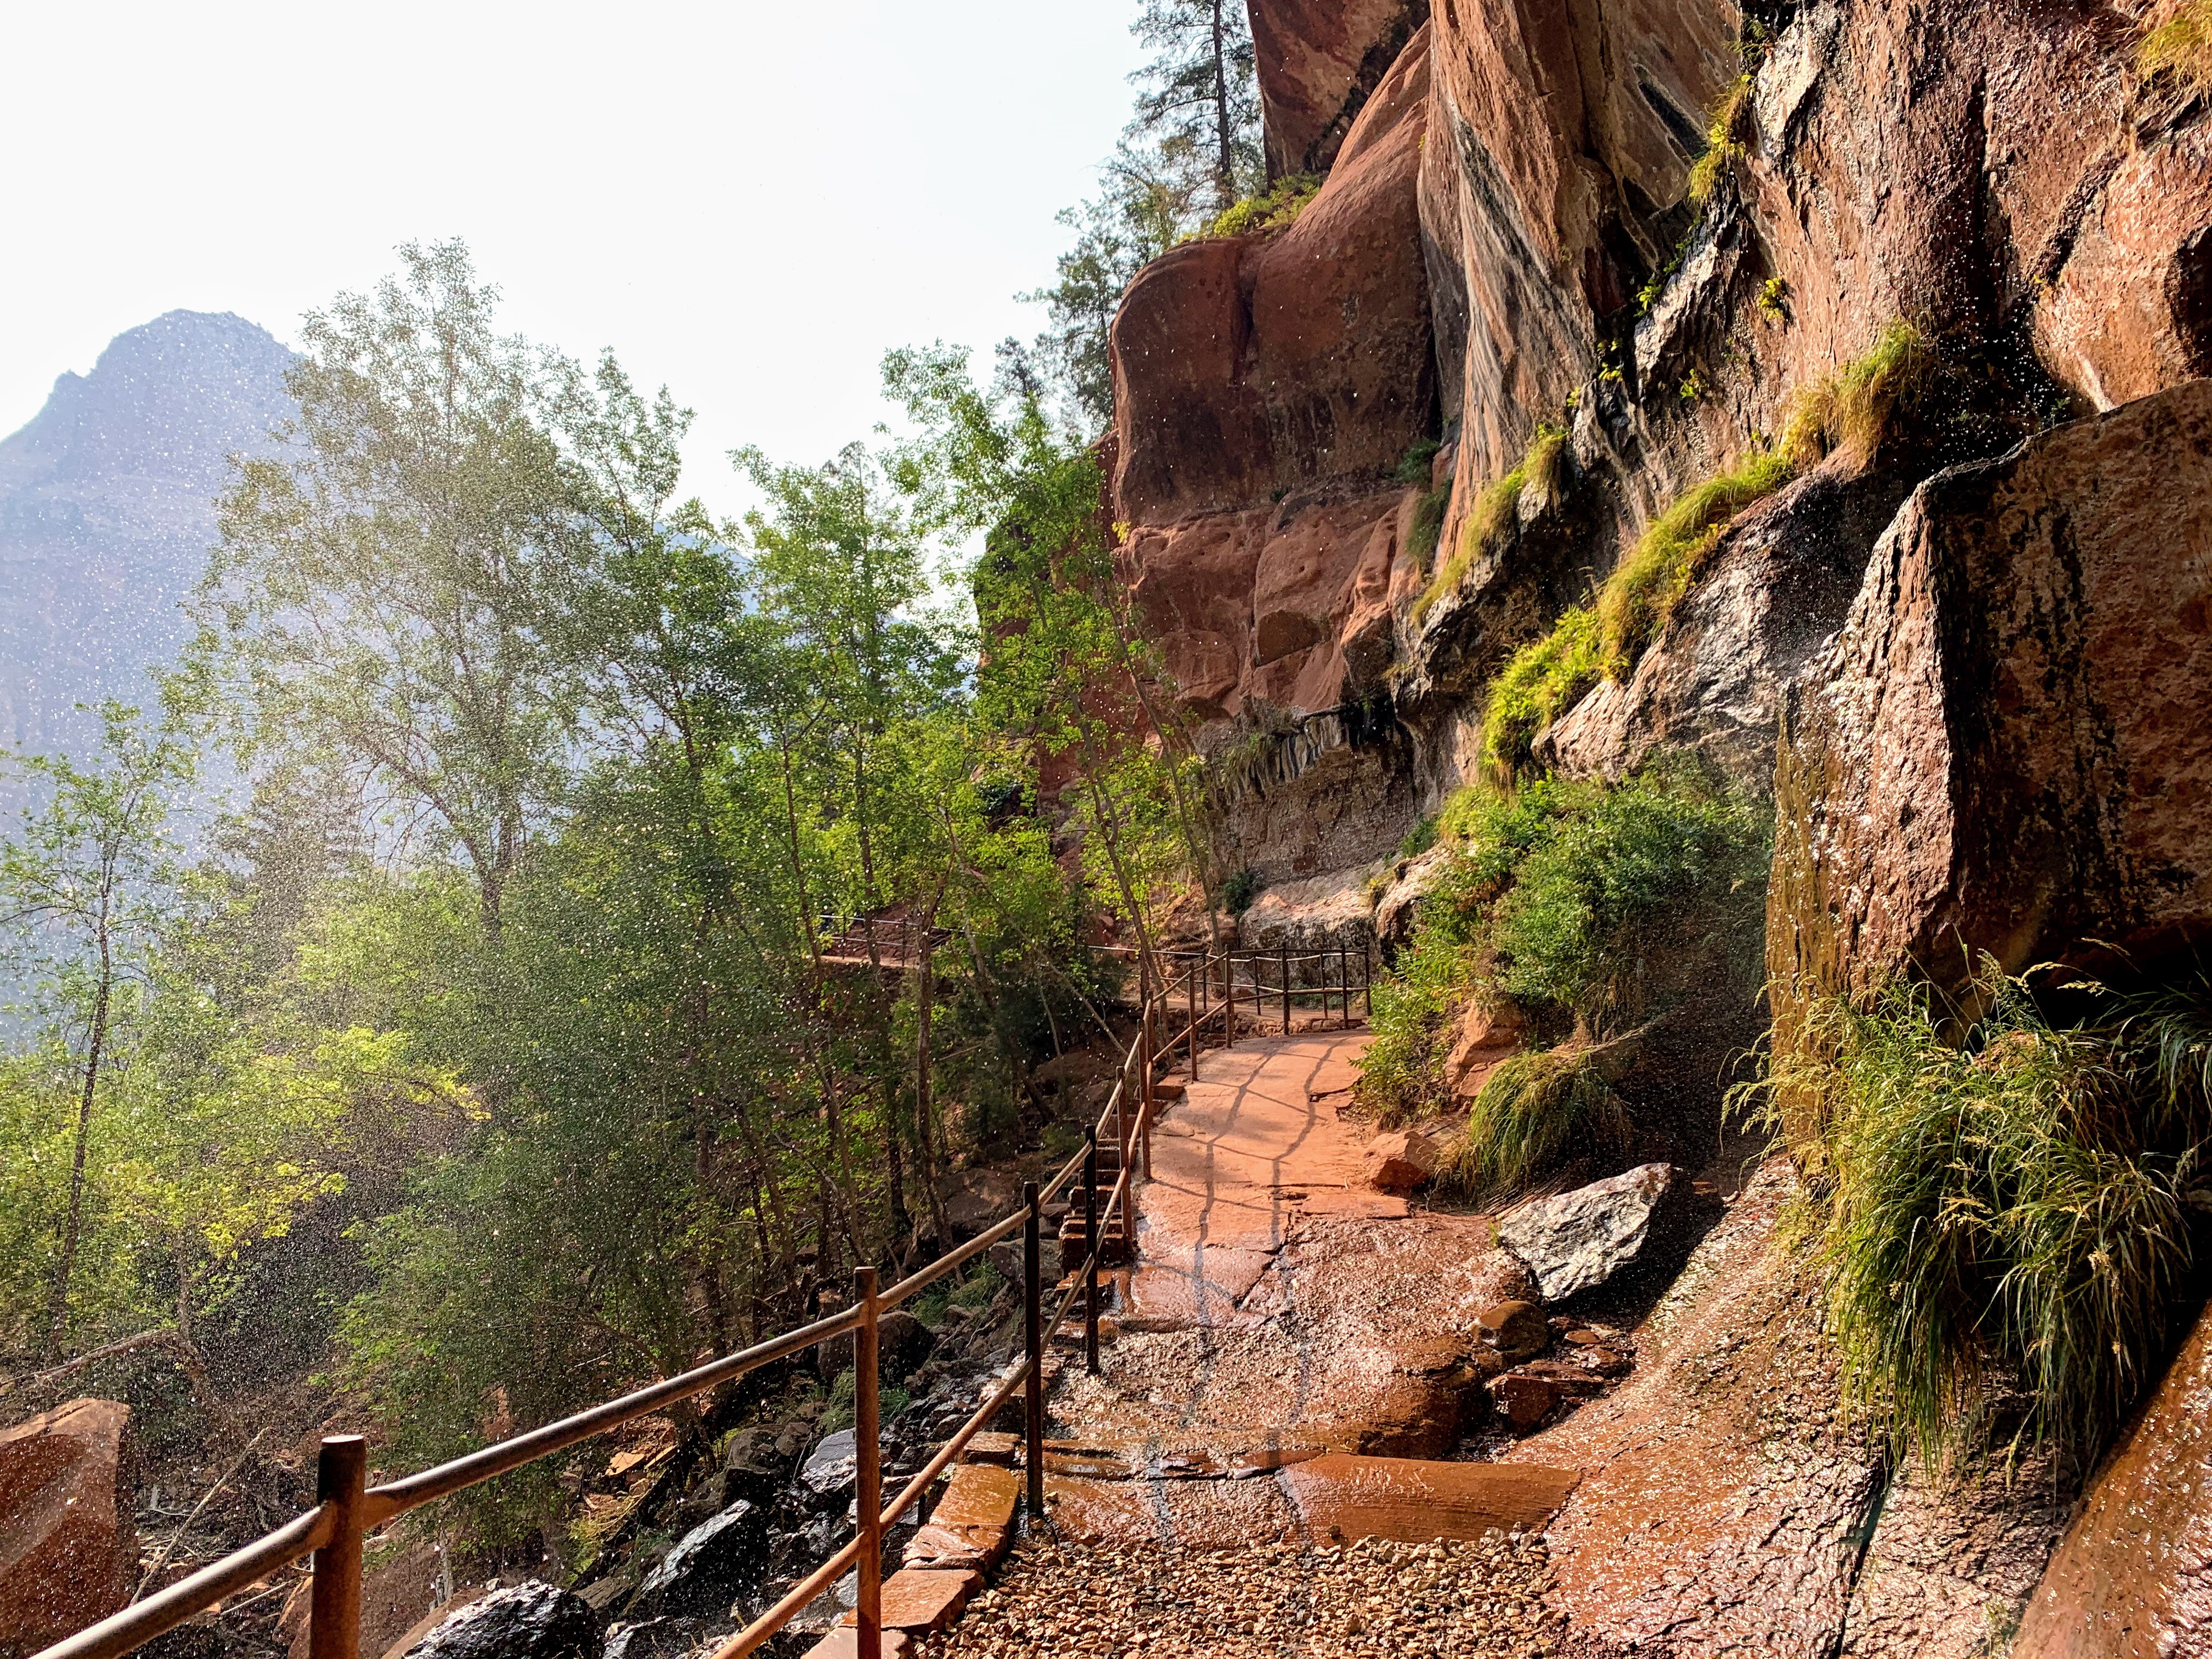 Lower Emerald Trail in Zion National Park.